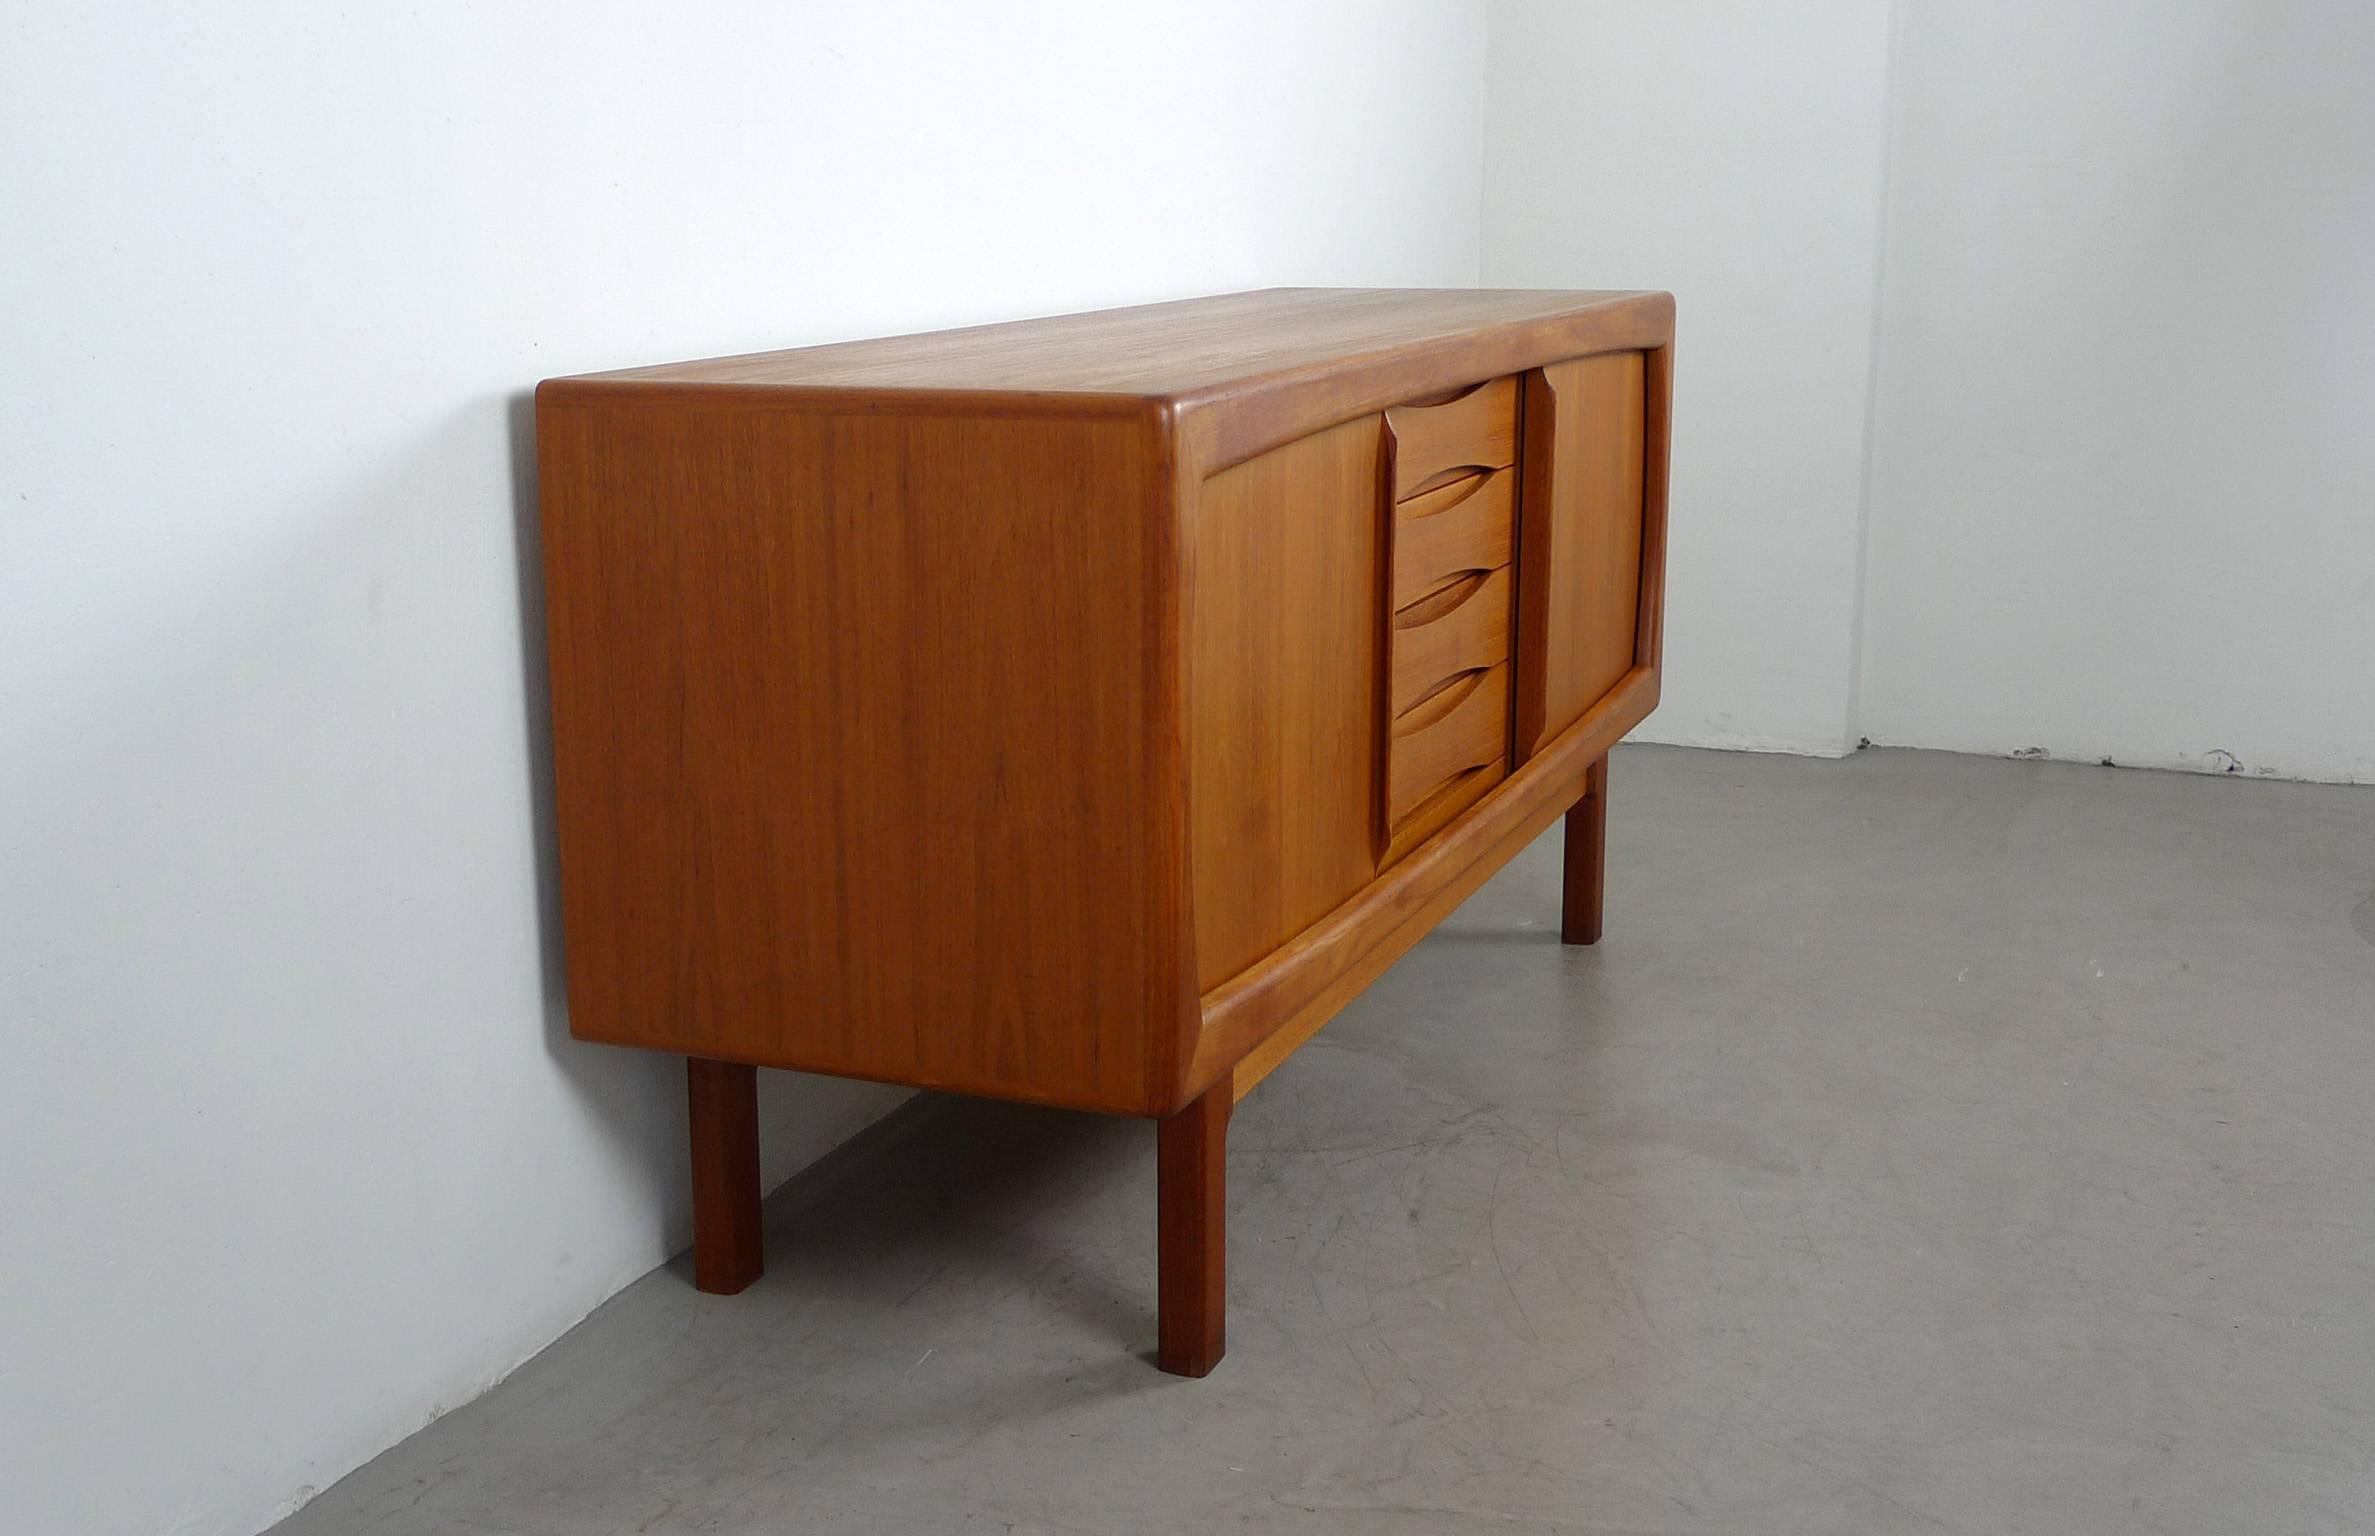 Danish Teak Sideboard with Sliding Doors and Drawers from Dyrlund, Denmark, 1960s